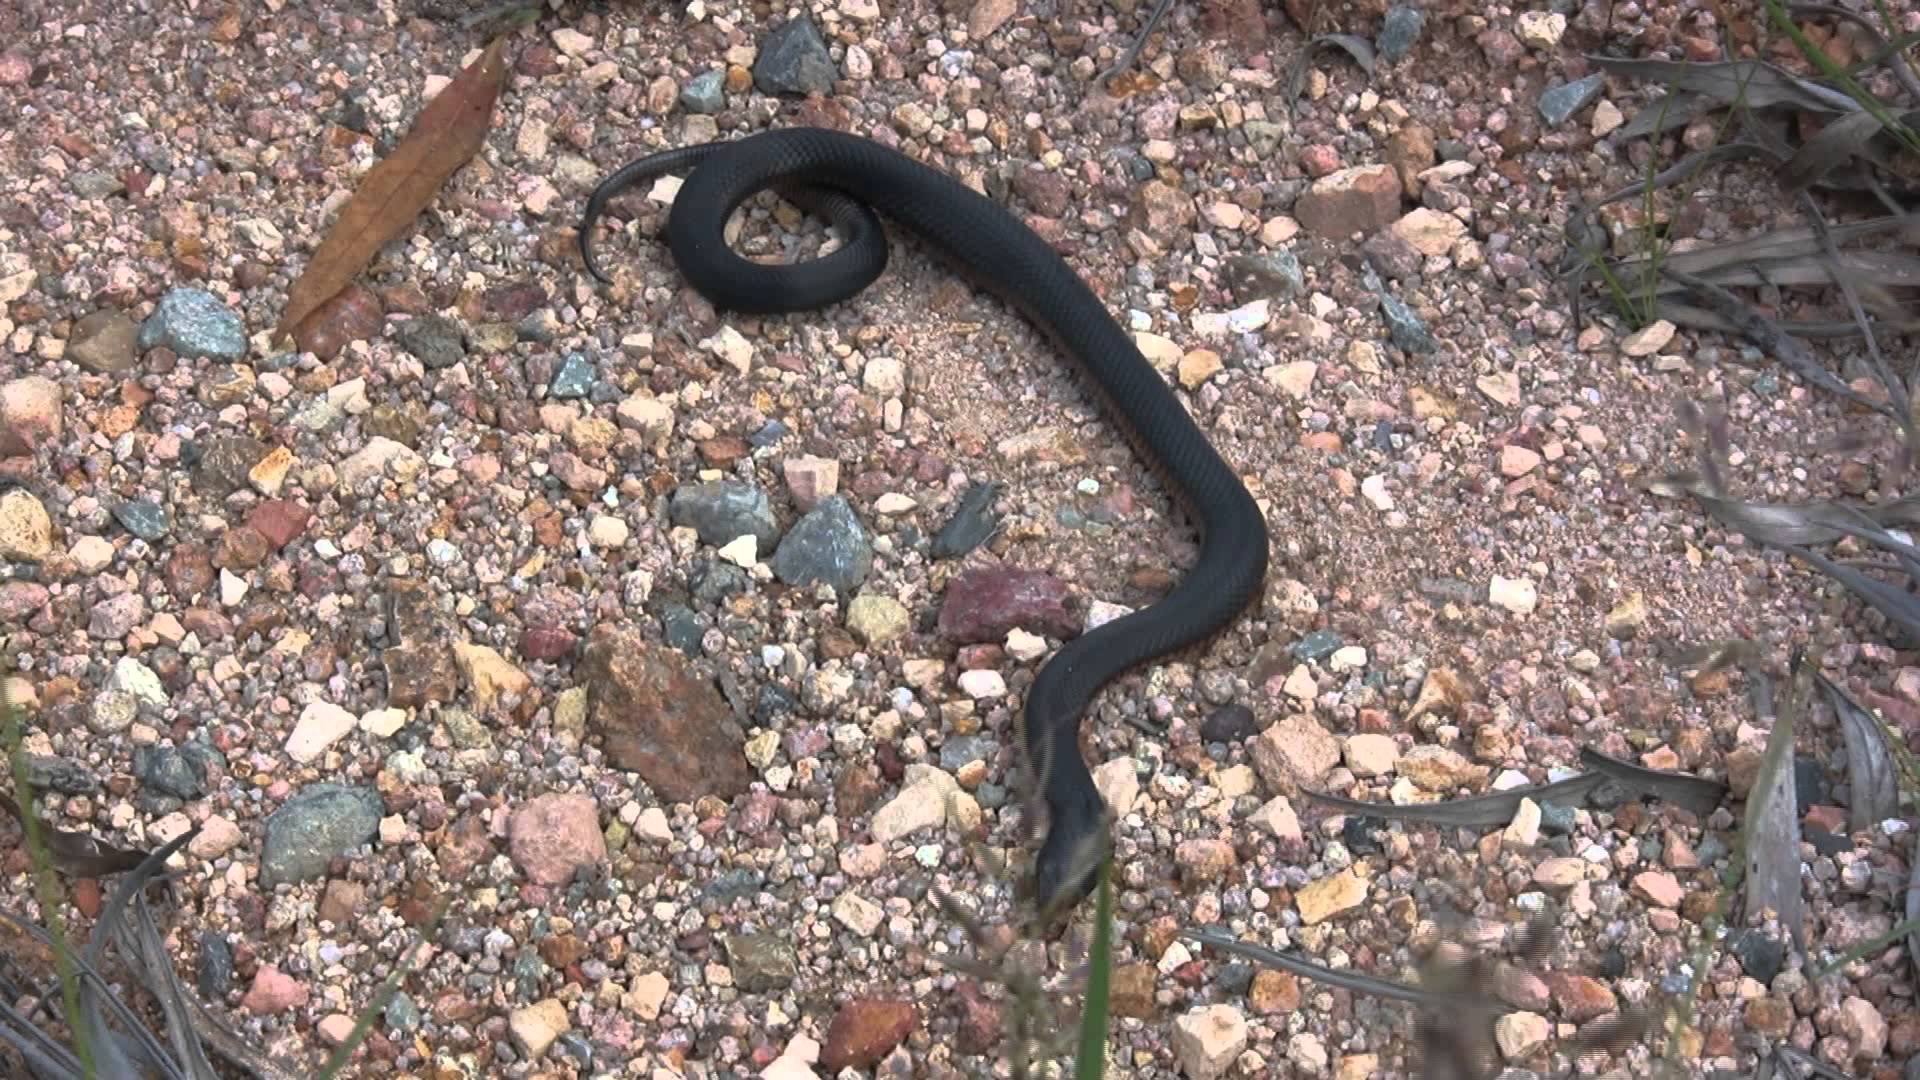 Red-Bellied Black Baby (Snake) - YouTube